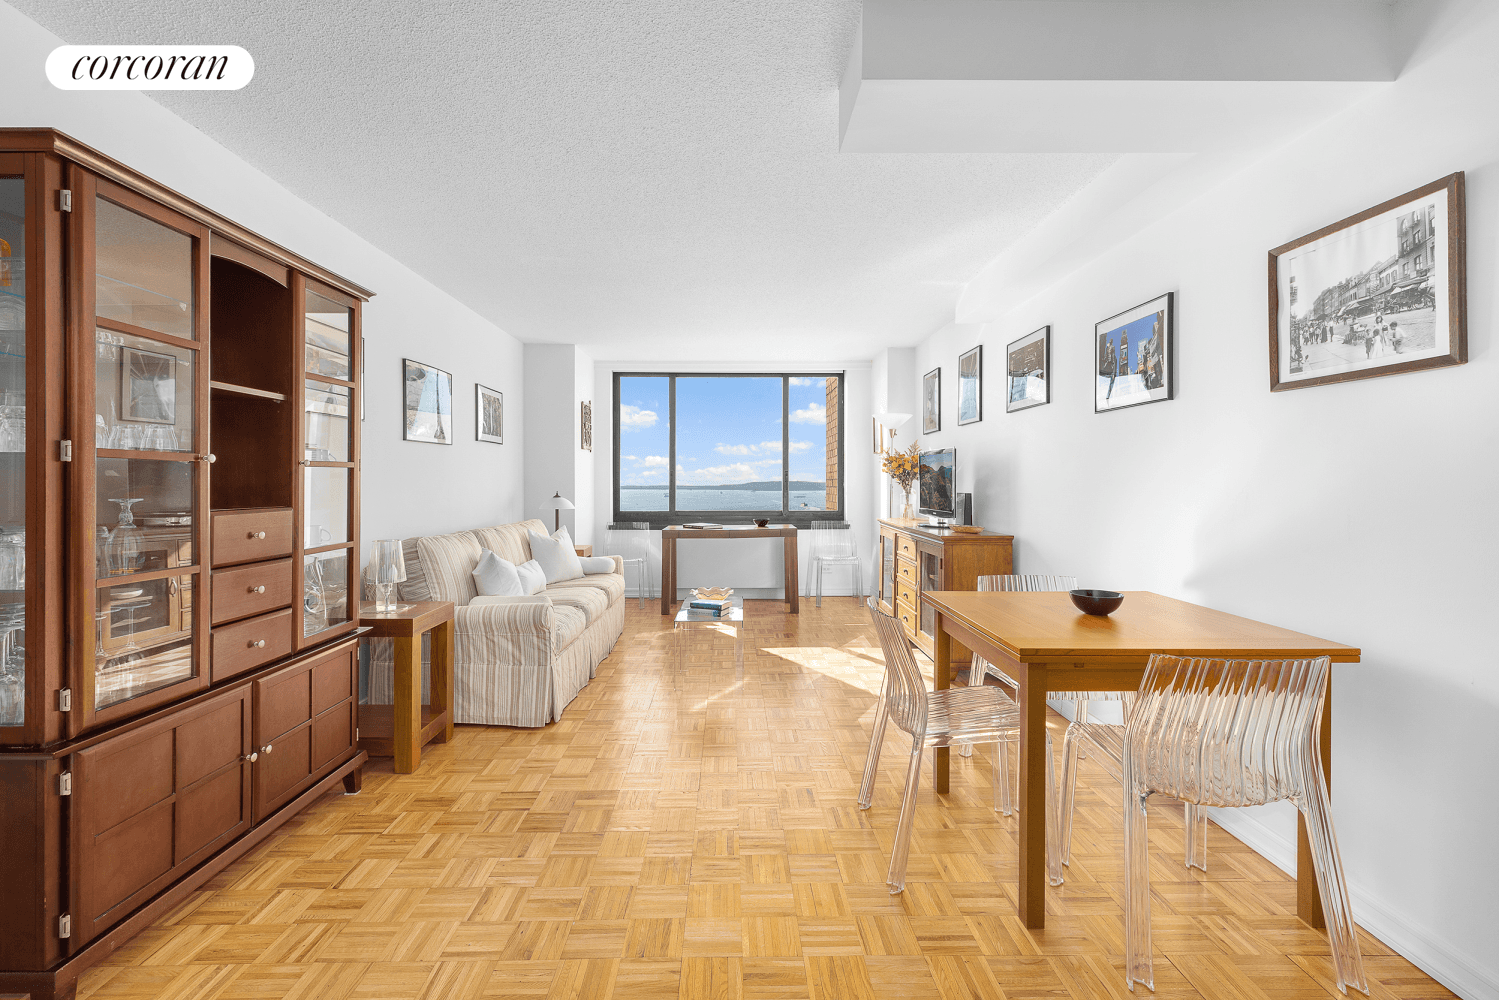 Discover your dream condo in this sun blasted, south facing one bedroom gem at the pinnacle of the F line.